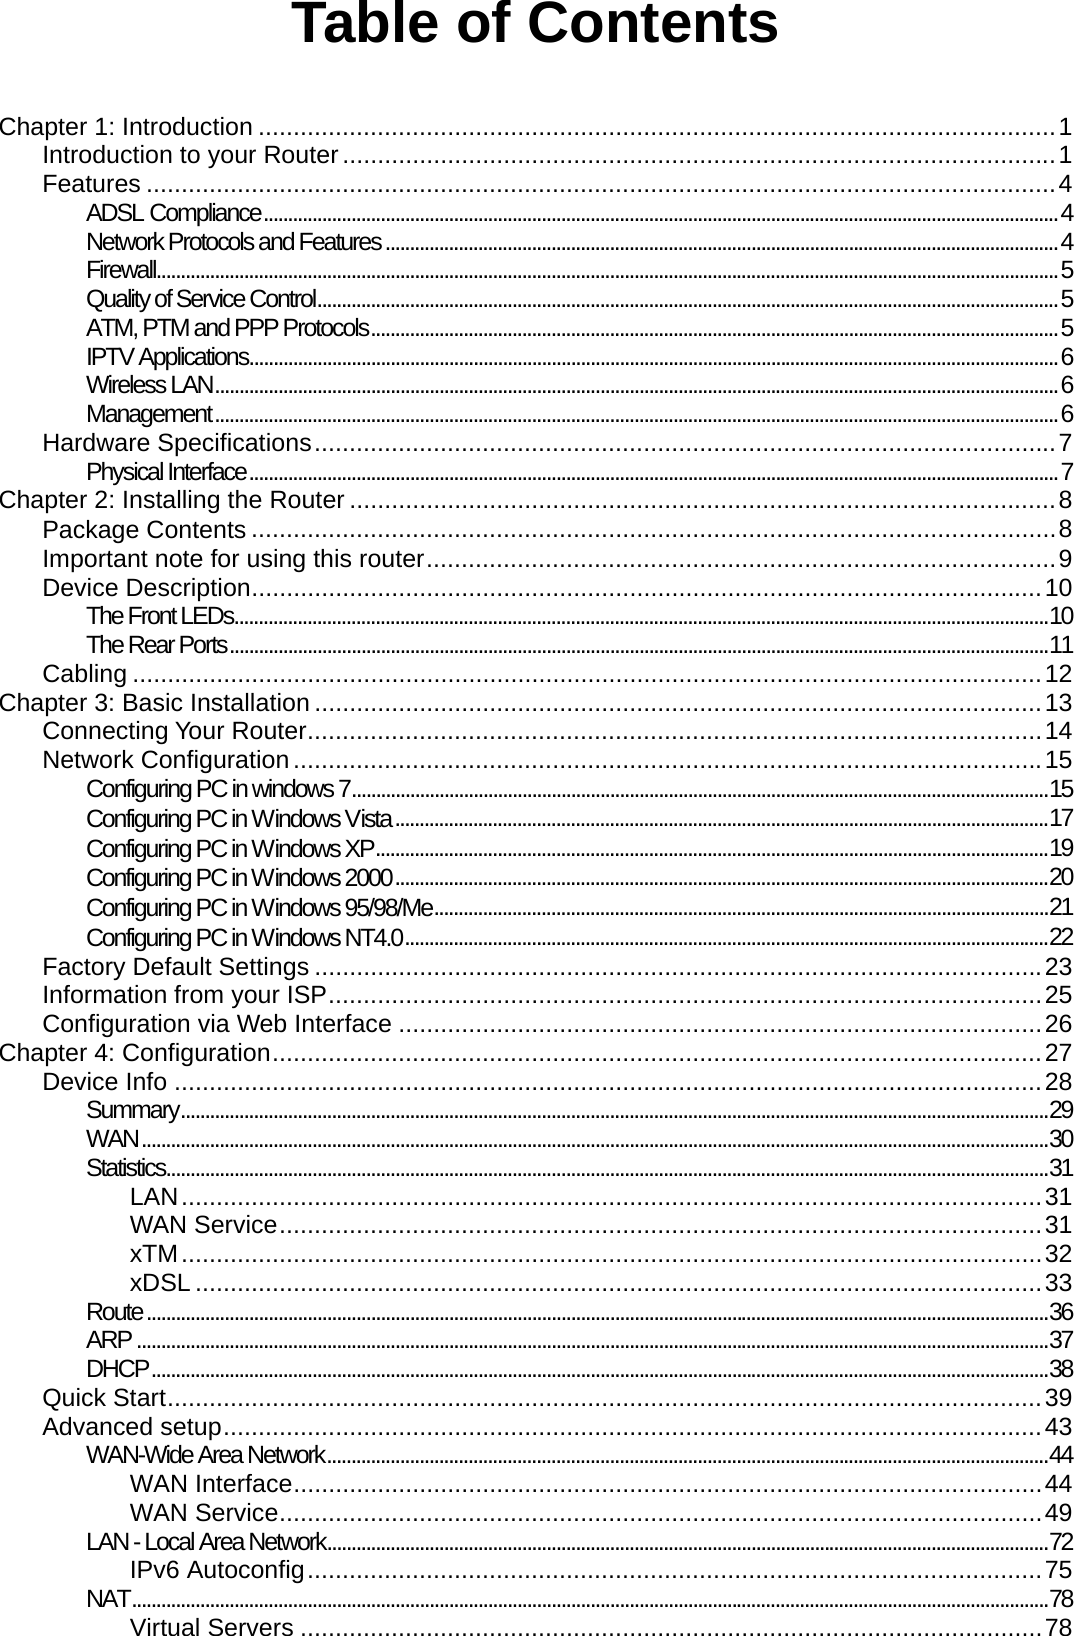 Table of Contents   Chapter 1: Introduction ..................................................................................................................1 Introduction to your Router......................................................................................................1 Features ..................................................................................................................................4 ADSL Compliance...................................................................................................................................................................4 Network Protocols and Features ..........................................................................................................................................4 Firewall.........................................................................................................................................................................................5 Quality of Service Control........................................................................................................................................................5 ATM, PTM and PPP Protocols.............................................................................................................................................5 IPTV Applications......................................................................................................................................................................6 Wireless LAN.............................................................................................................................................................................6 Management.............................................................................................................................................................................6 Hardware Specifications..........................................................................................................7 Physical Interface......................................................................................................................................................................7 Chapter 2: Installing the Router .....................................................................................................8 Package Contents ...................................................................................................................8 Important note for using this router..........................................................................................9 Device Description.................................................................................................................10 The Front LEDs.......................................................................................................................................................................10 The Rear Ports........................................................................................................................................................................11 Cabling ..................................................................................................................................12 Chapter 3: Basic Installation ........................................................................................................13 Connecting Your Router.........................................................................................................14 Network Configuration...........................................................................................................15 Configuring PC in windows 7...............................................................................................................................................15 Configuring PC in Windows Vista......................................................................................................................................17 Configuring PC in Windows XP..........................................................................................................................................19 Configuring PC in Windows 2000......................................................................................................................................20 Configuring PC in Windows 95/98/Me..............................................................................................................................21 Configuring PC in Windows NT4.0....................................................................................................................................22 Factory Default Settings ........................................................................................................23 Information from your ISP......................................................................................................25 Configuration via Web Interface ............................................................................................26 Chapter 4: Configuration..............................................................................................................27 Device Info ............................................................................................................................28 Summary..................................................................................................................................................................................29 WAN..........................................................................................................................................................................................30 Statistics.....................................................................................................................................................................................31 LAN...........................................................................................................................31 WAN Service.............................................................................................................31 xTM...........................................................................................................................32 xDSL .........................................................................................................................33 Route.........................................................................................................................................................................................36 ARP ...........................................................................................................................................................................................37 DHCP........................................................................................................................................................................................38 Quick Start.............................................................................................................................39 Advanced setup.....................................................................................................................43 WAN-Wide Area Network....................................................................................................................................................44 WAN Interface...........................................................................................................44 WAN Service.............................................................................................................49 LAN - Local Area Network....................................................................................................................................................72 IPv6 Autoconfig.........................................................................................................75 NAT............................................................................................................................................................................................78 Virtual Servers ..........................................................................................................78 